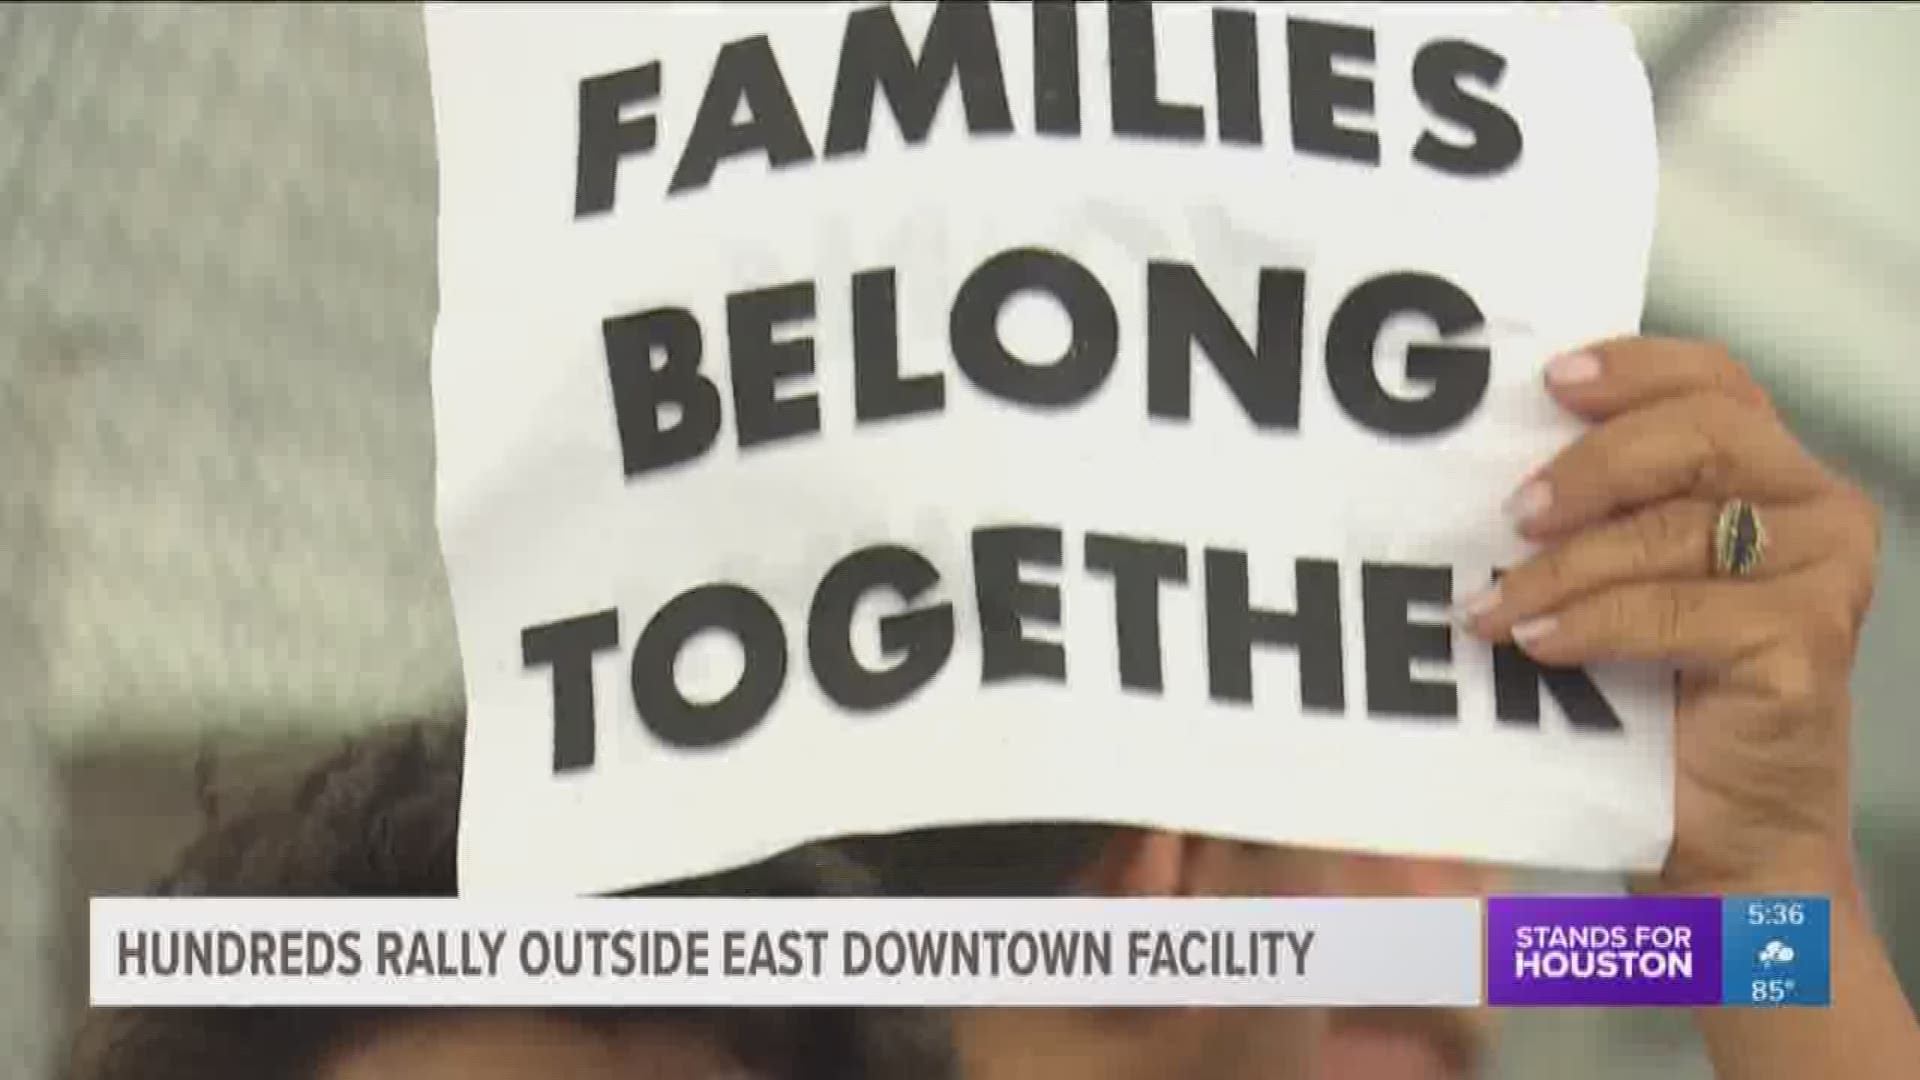 Tempers flare over proposed immigrant shelter east of downtown Houston